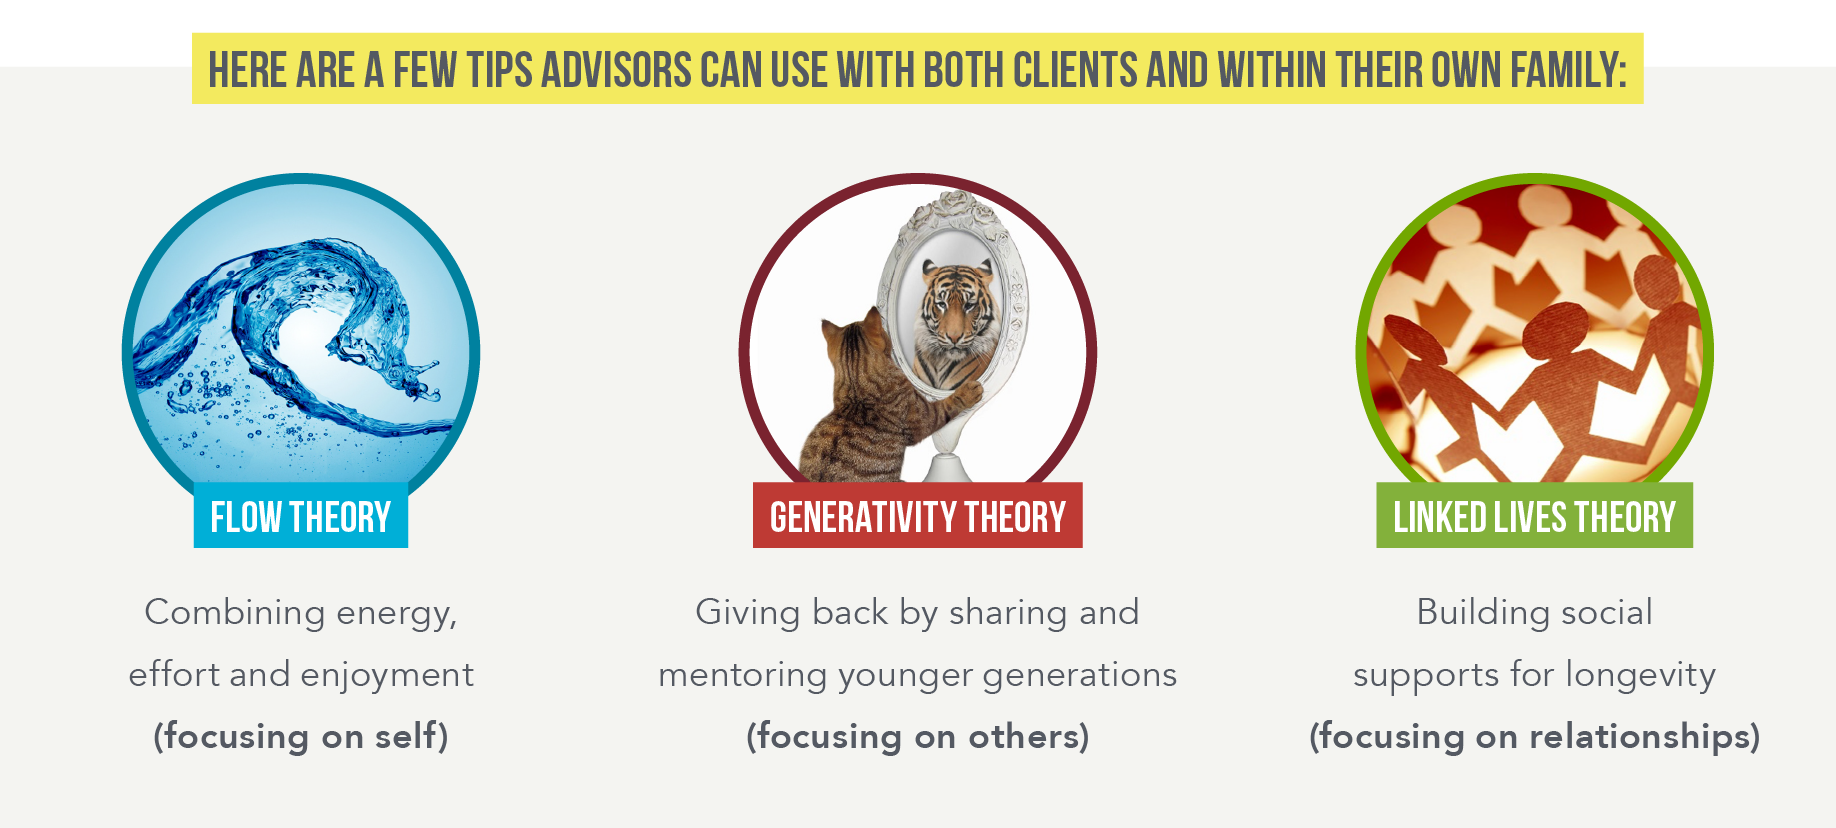 Graphic with three circles that explain a few tips advisors can use with both clients and within their own family. The first circle shows a wave of water and says Flow Theory: Combining energy, effort ad enjoyment (focusing on self). The second circle shows a cat looking in a mirror and seeing a reflection of a tiger and says Generativity Theory: Giving back by sharing and mentoring younger generations (focusing on others). The third circle shows paper dolls holding hands and says Linked Lived Theory: Building social supports for longevity (focusing on relationships)